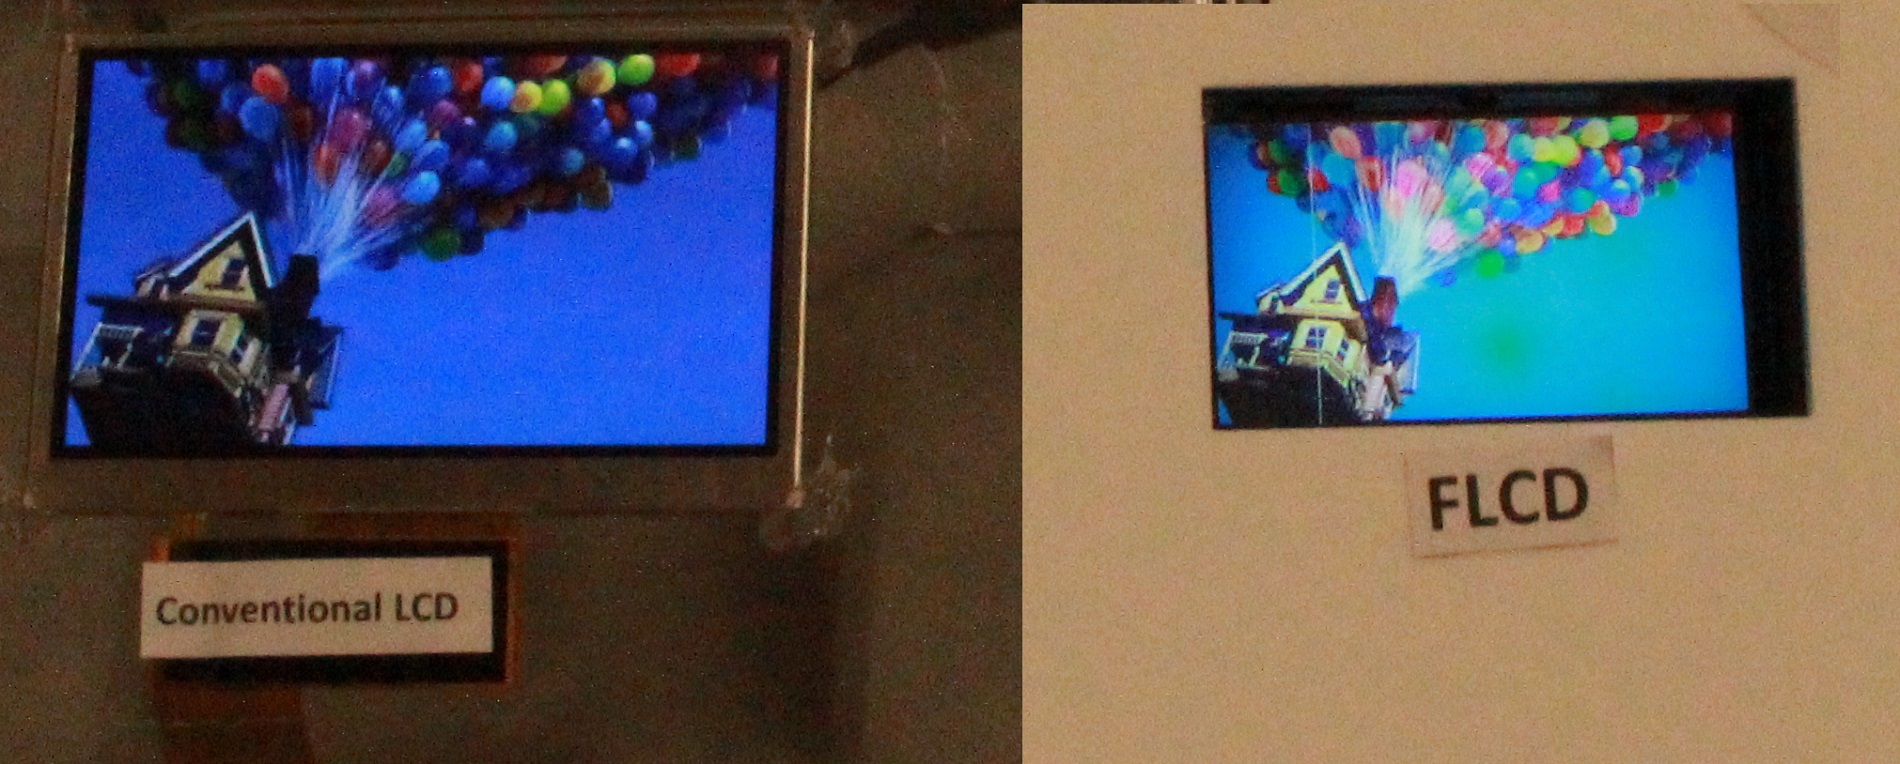 HKUST’s FLCD (right) outperforms traditional LCDs (left) in both image resolution and color saturation